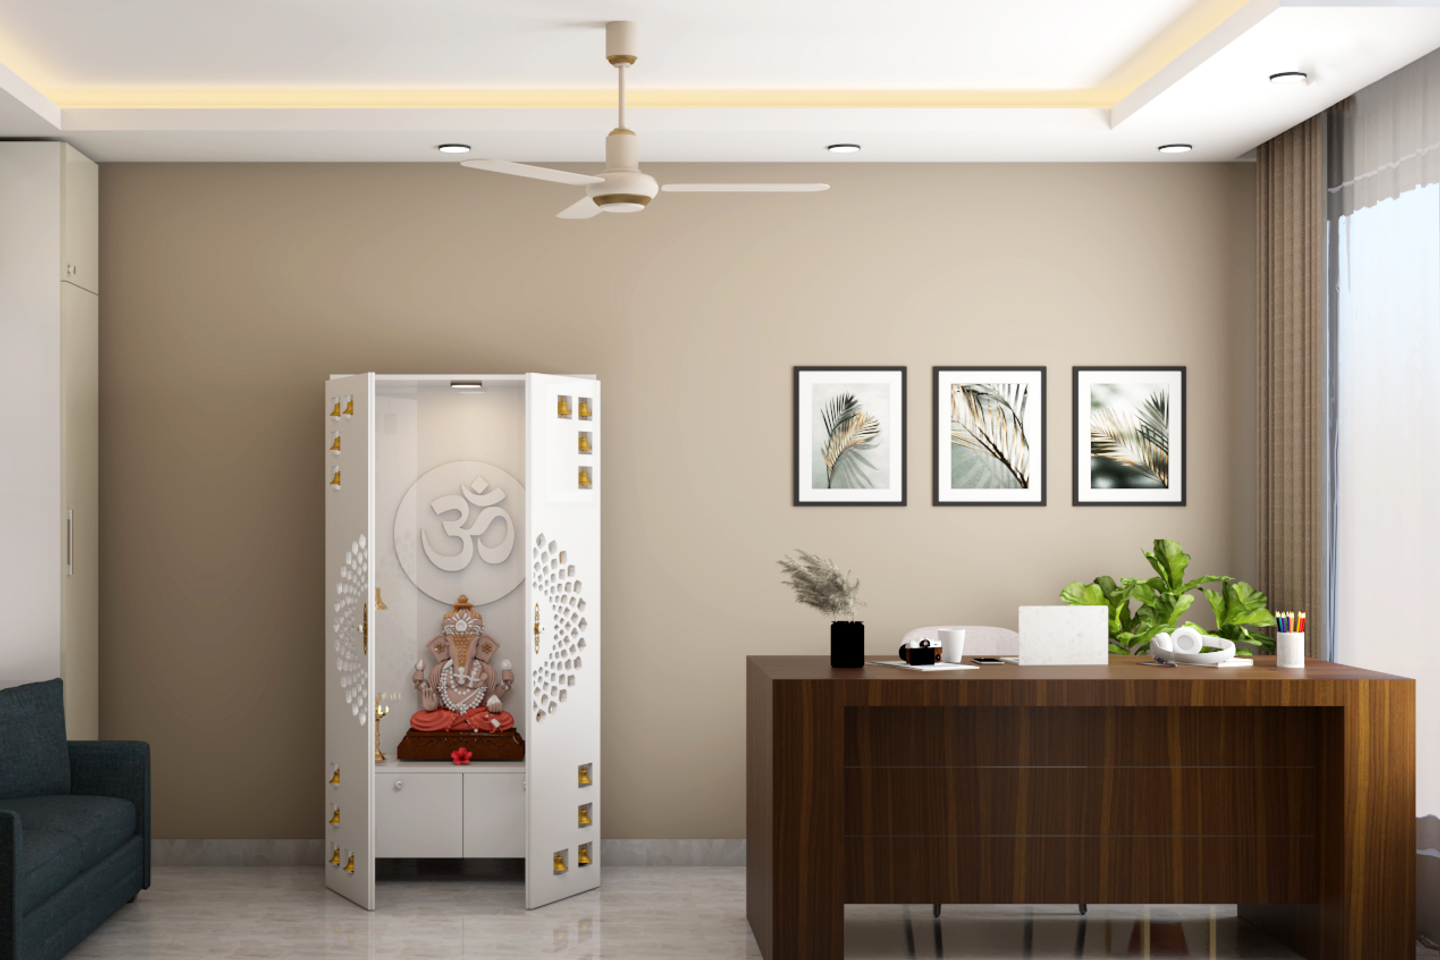 Pooja Room Design With Home Office - Livspace